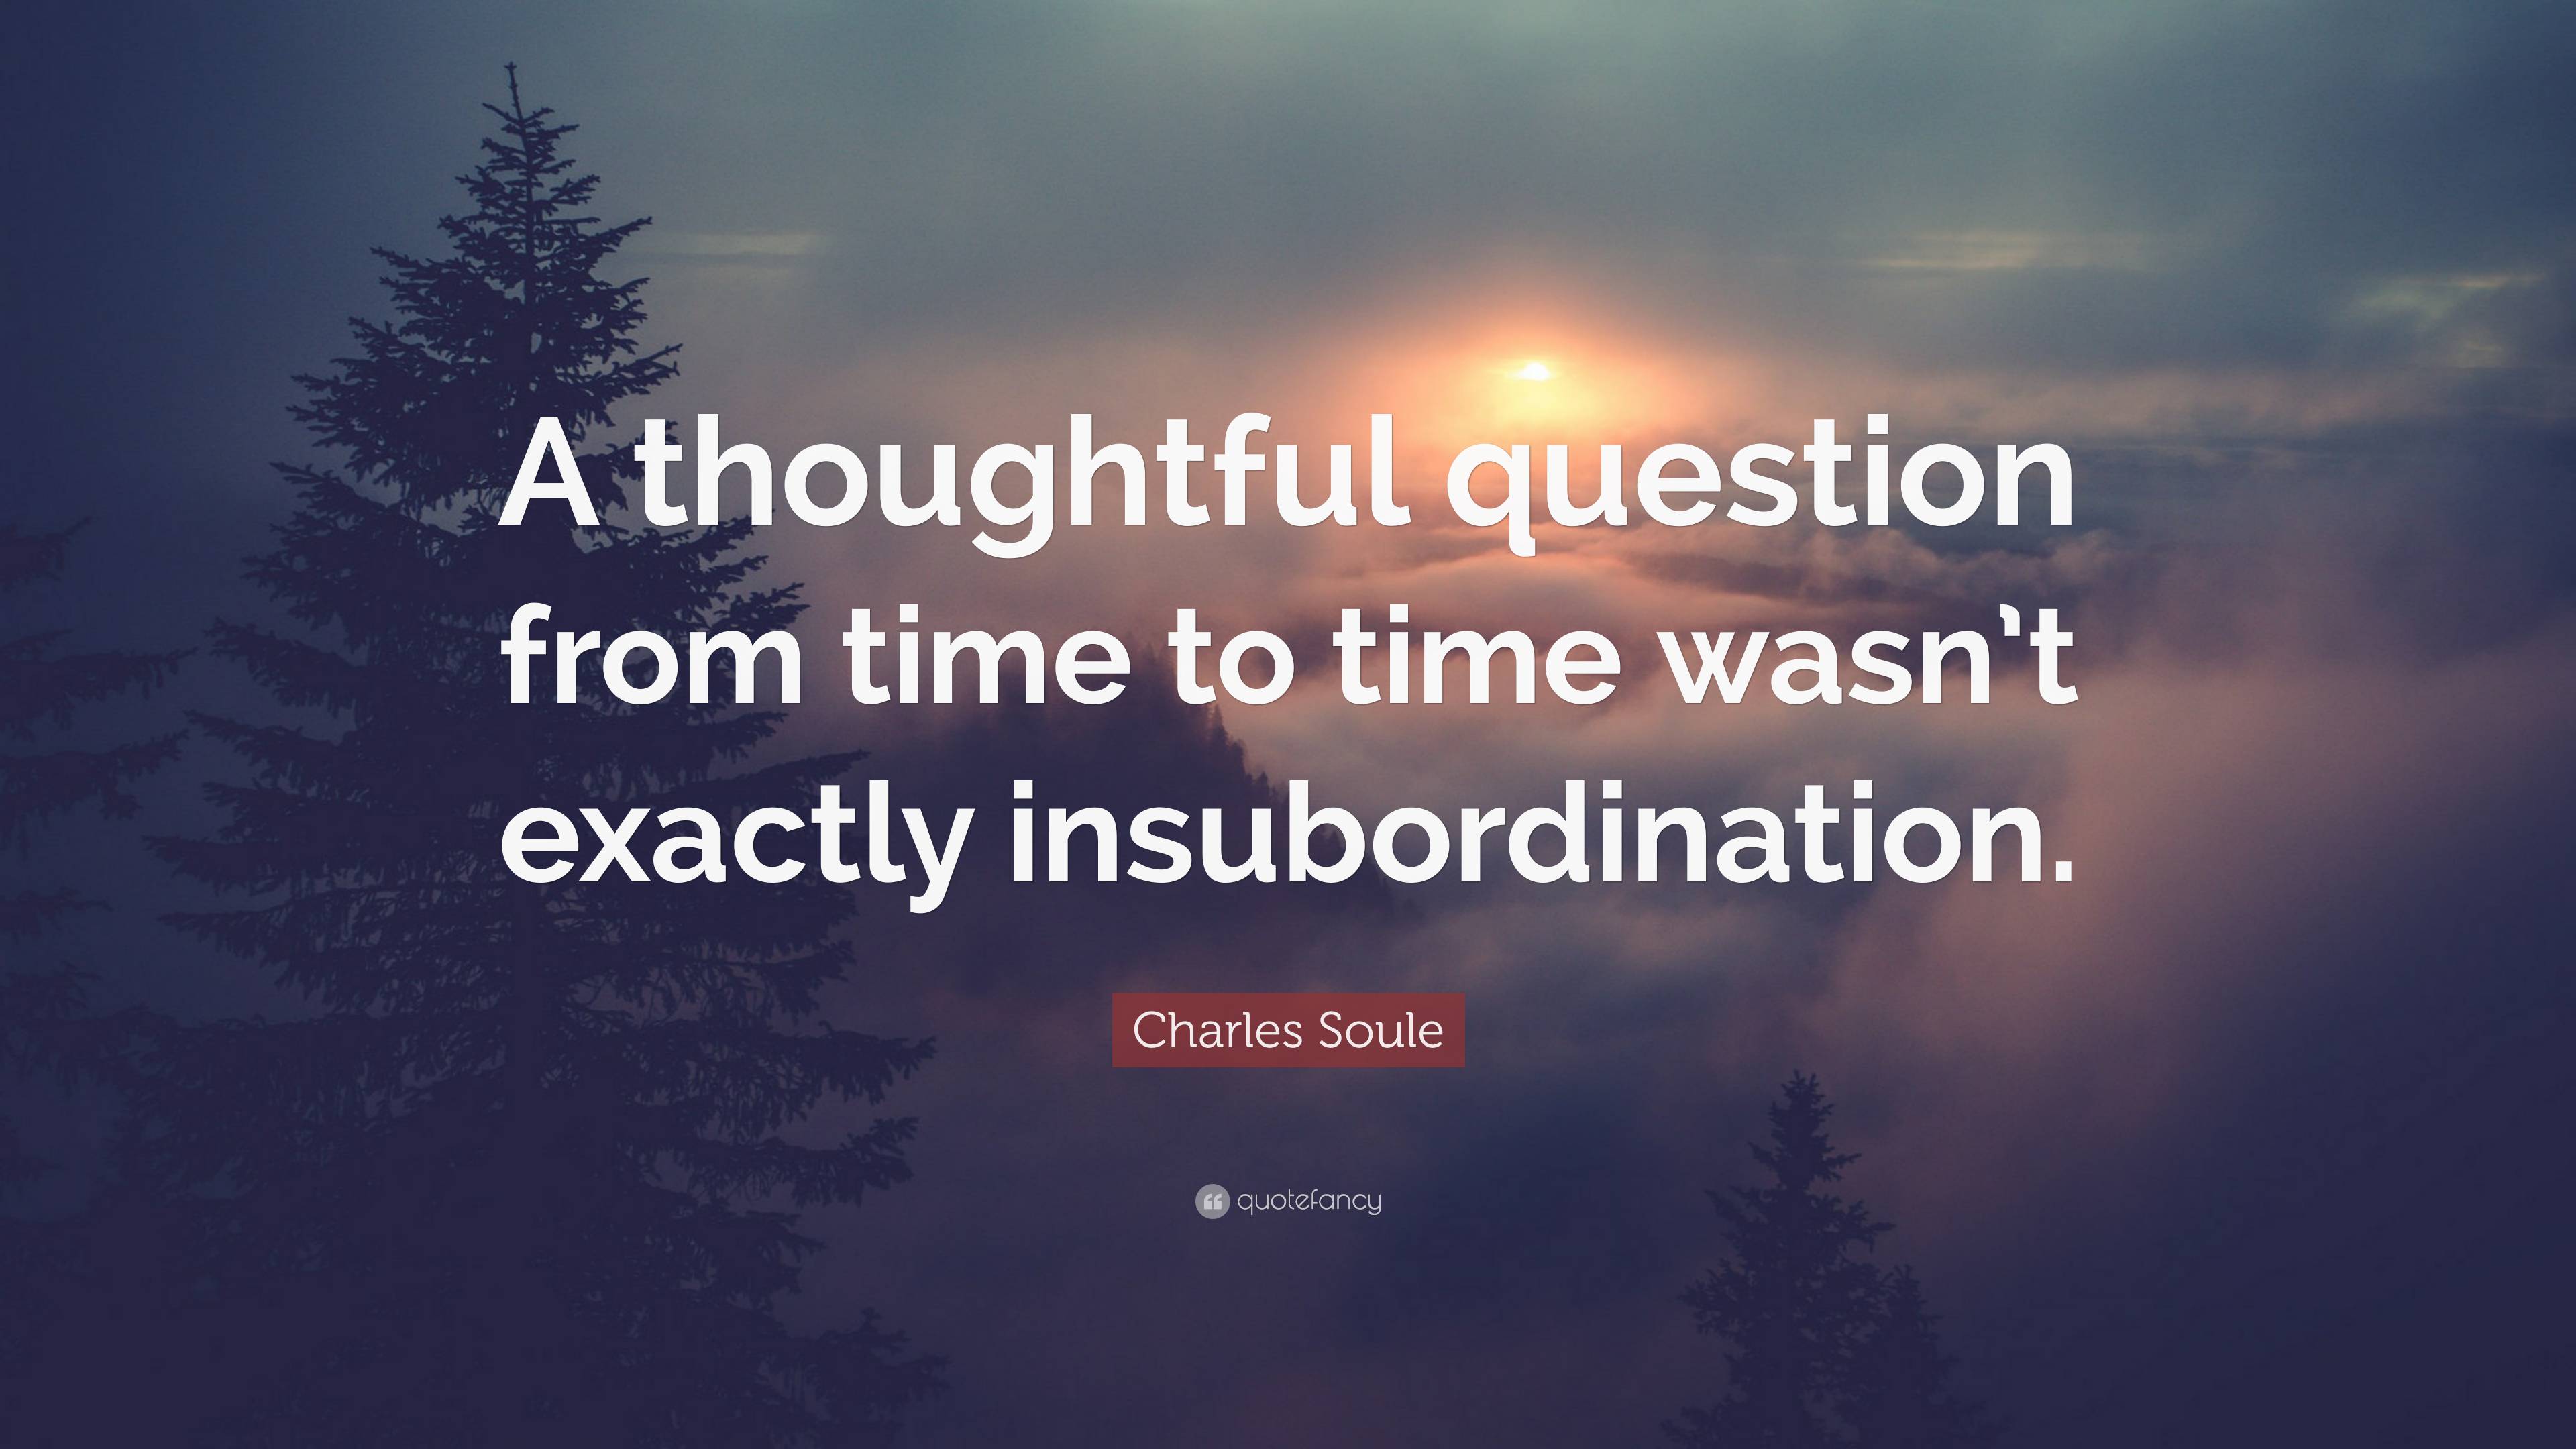 https://quotefancy.com/media/wallpaper/3840x2160/7588095-Charles-Soule-Quote-A-thoughtful-question-from-time-to-time-wasn-t.jpg